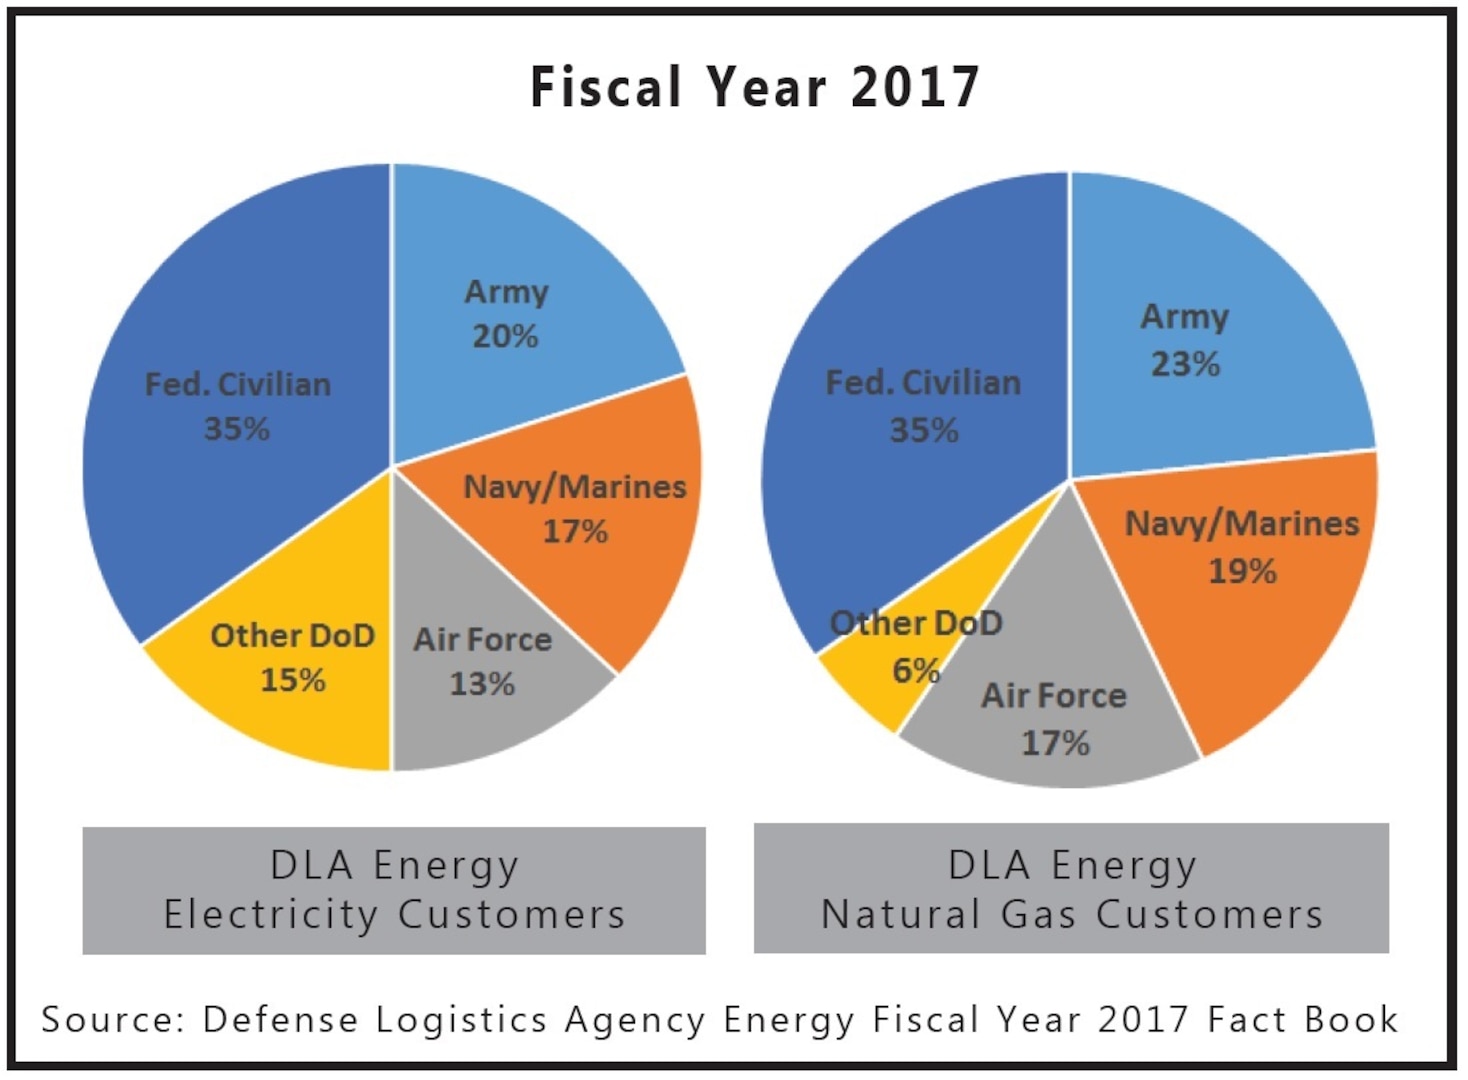 DLA Energy electricity and natural gas customers